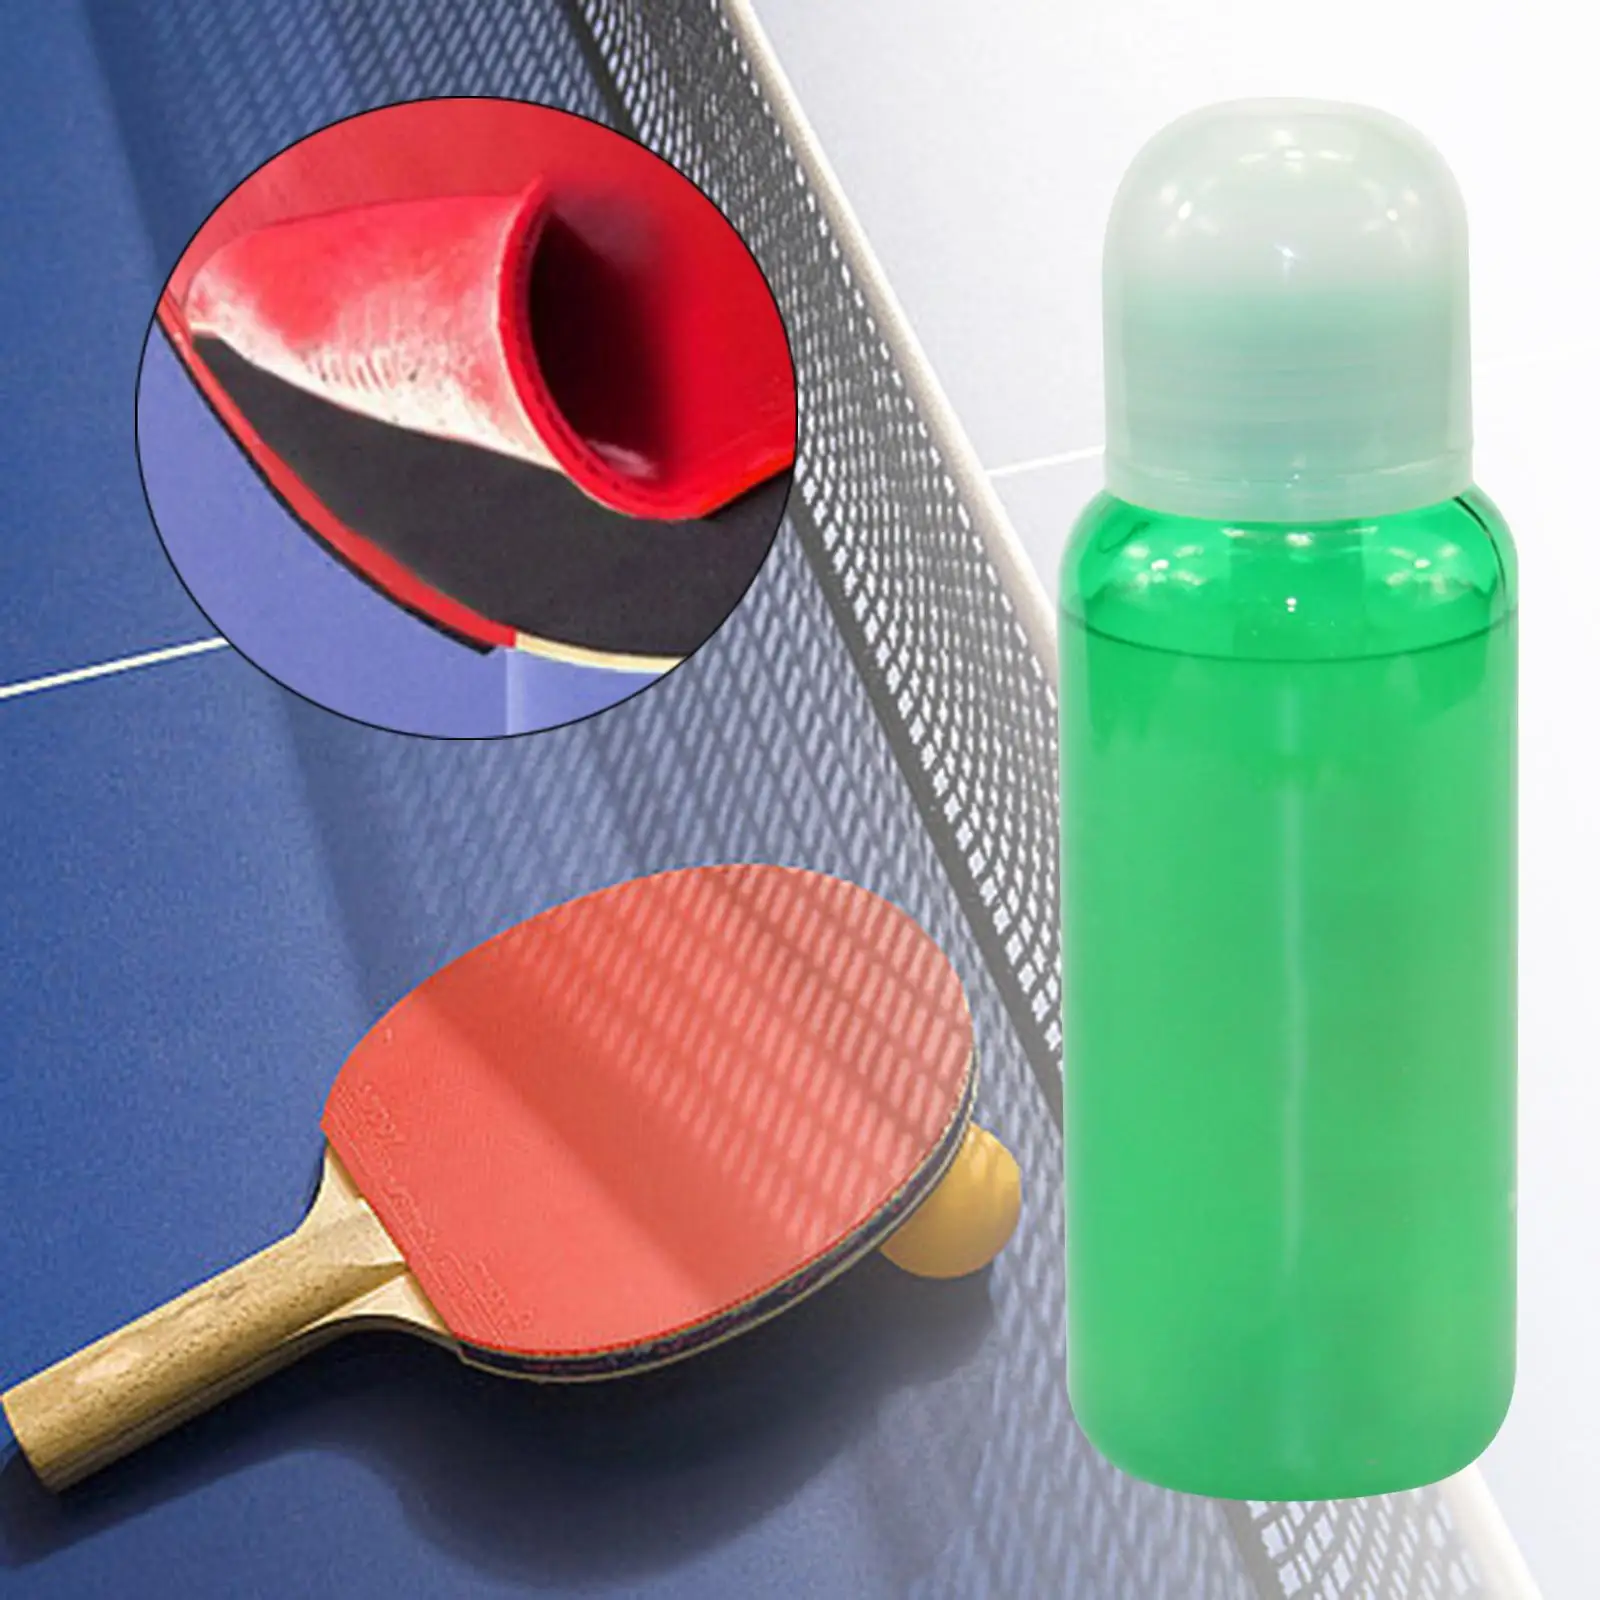 Table Tennis Rackets Glue Accessory 250ml for Assembling Table Tennis Paddle